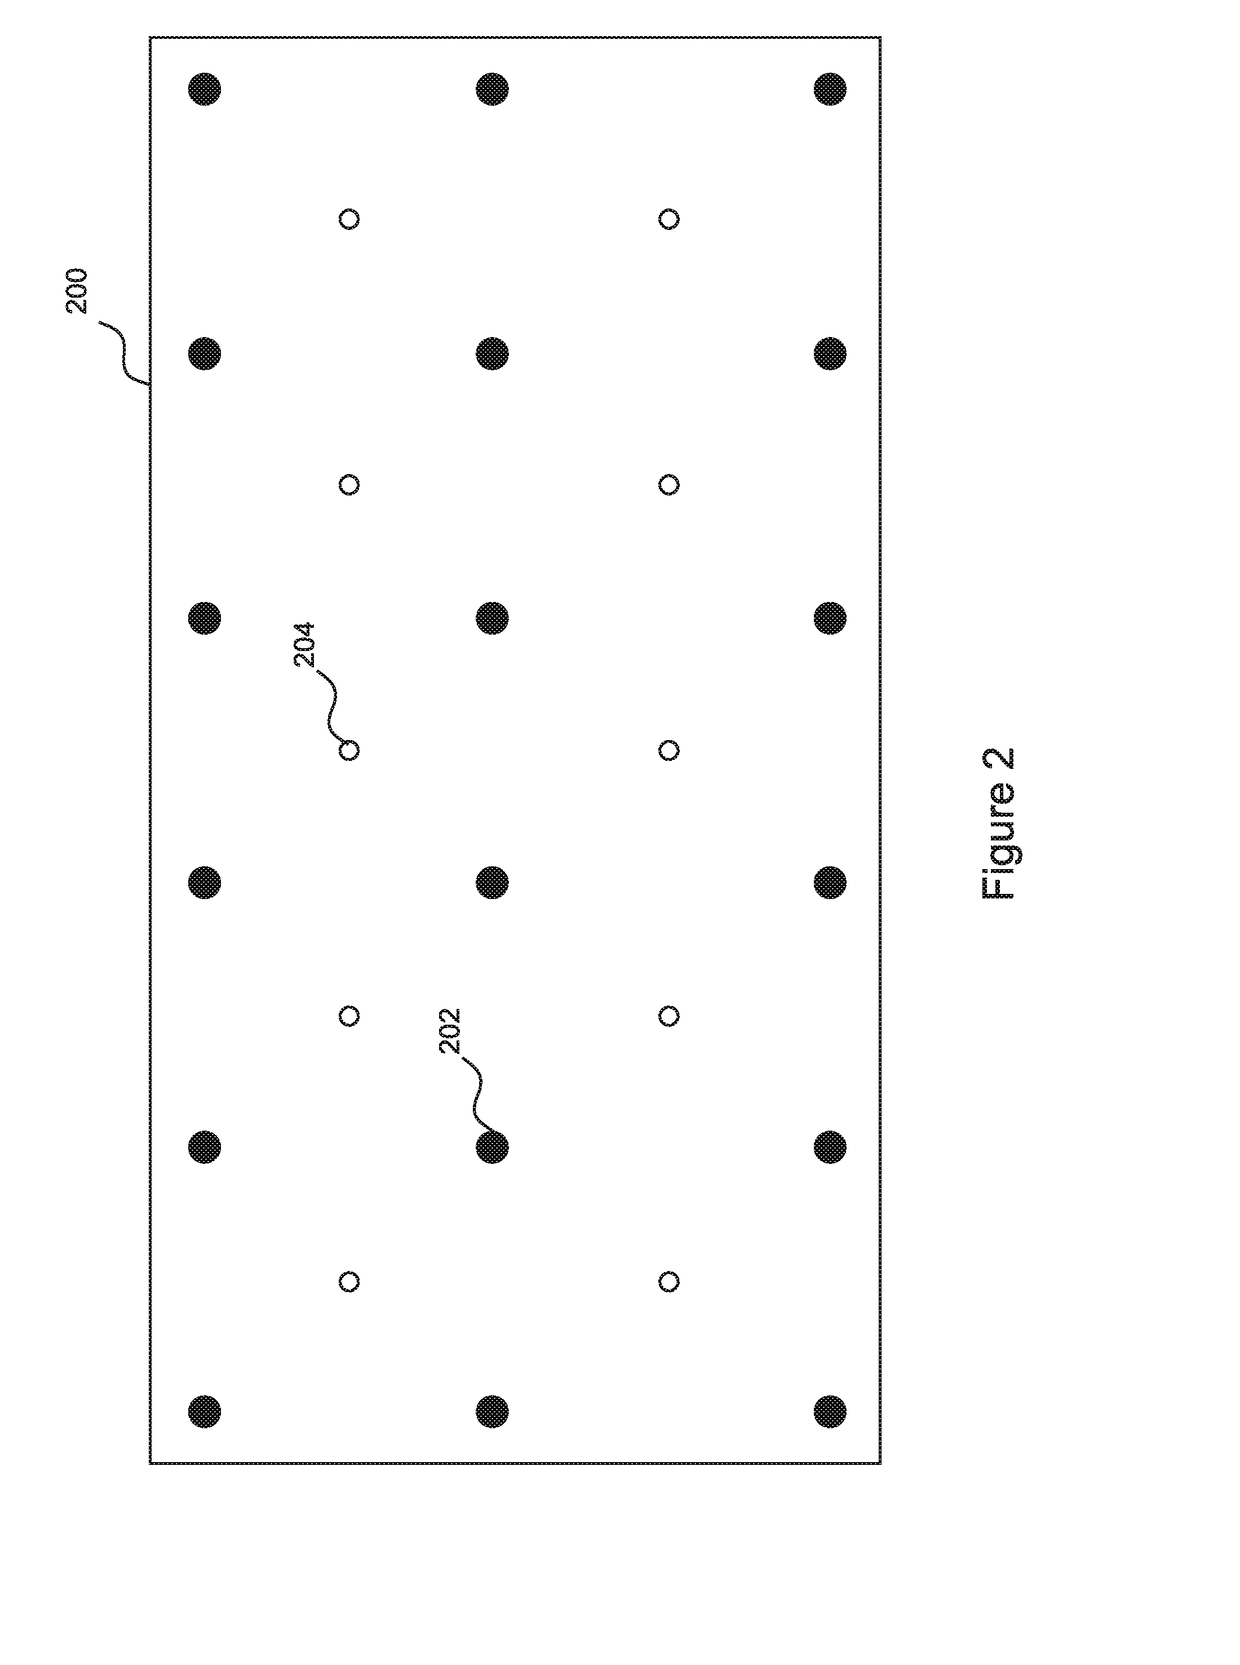 Apparatus and method for establishing and growing vegetation in arid environments